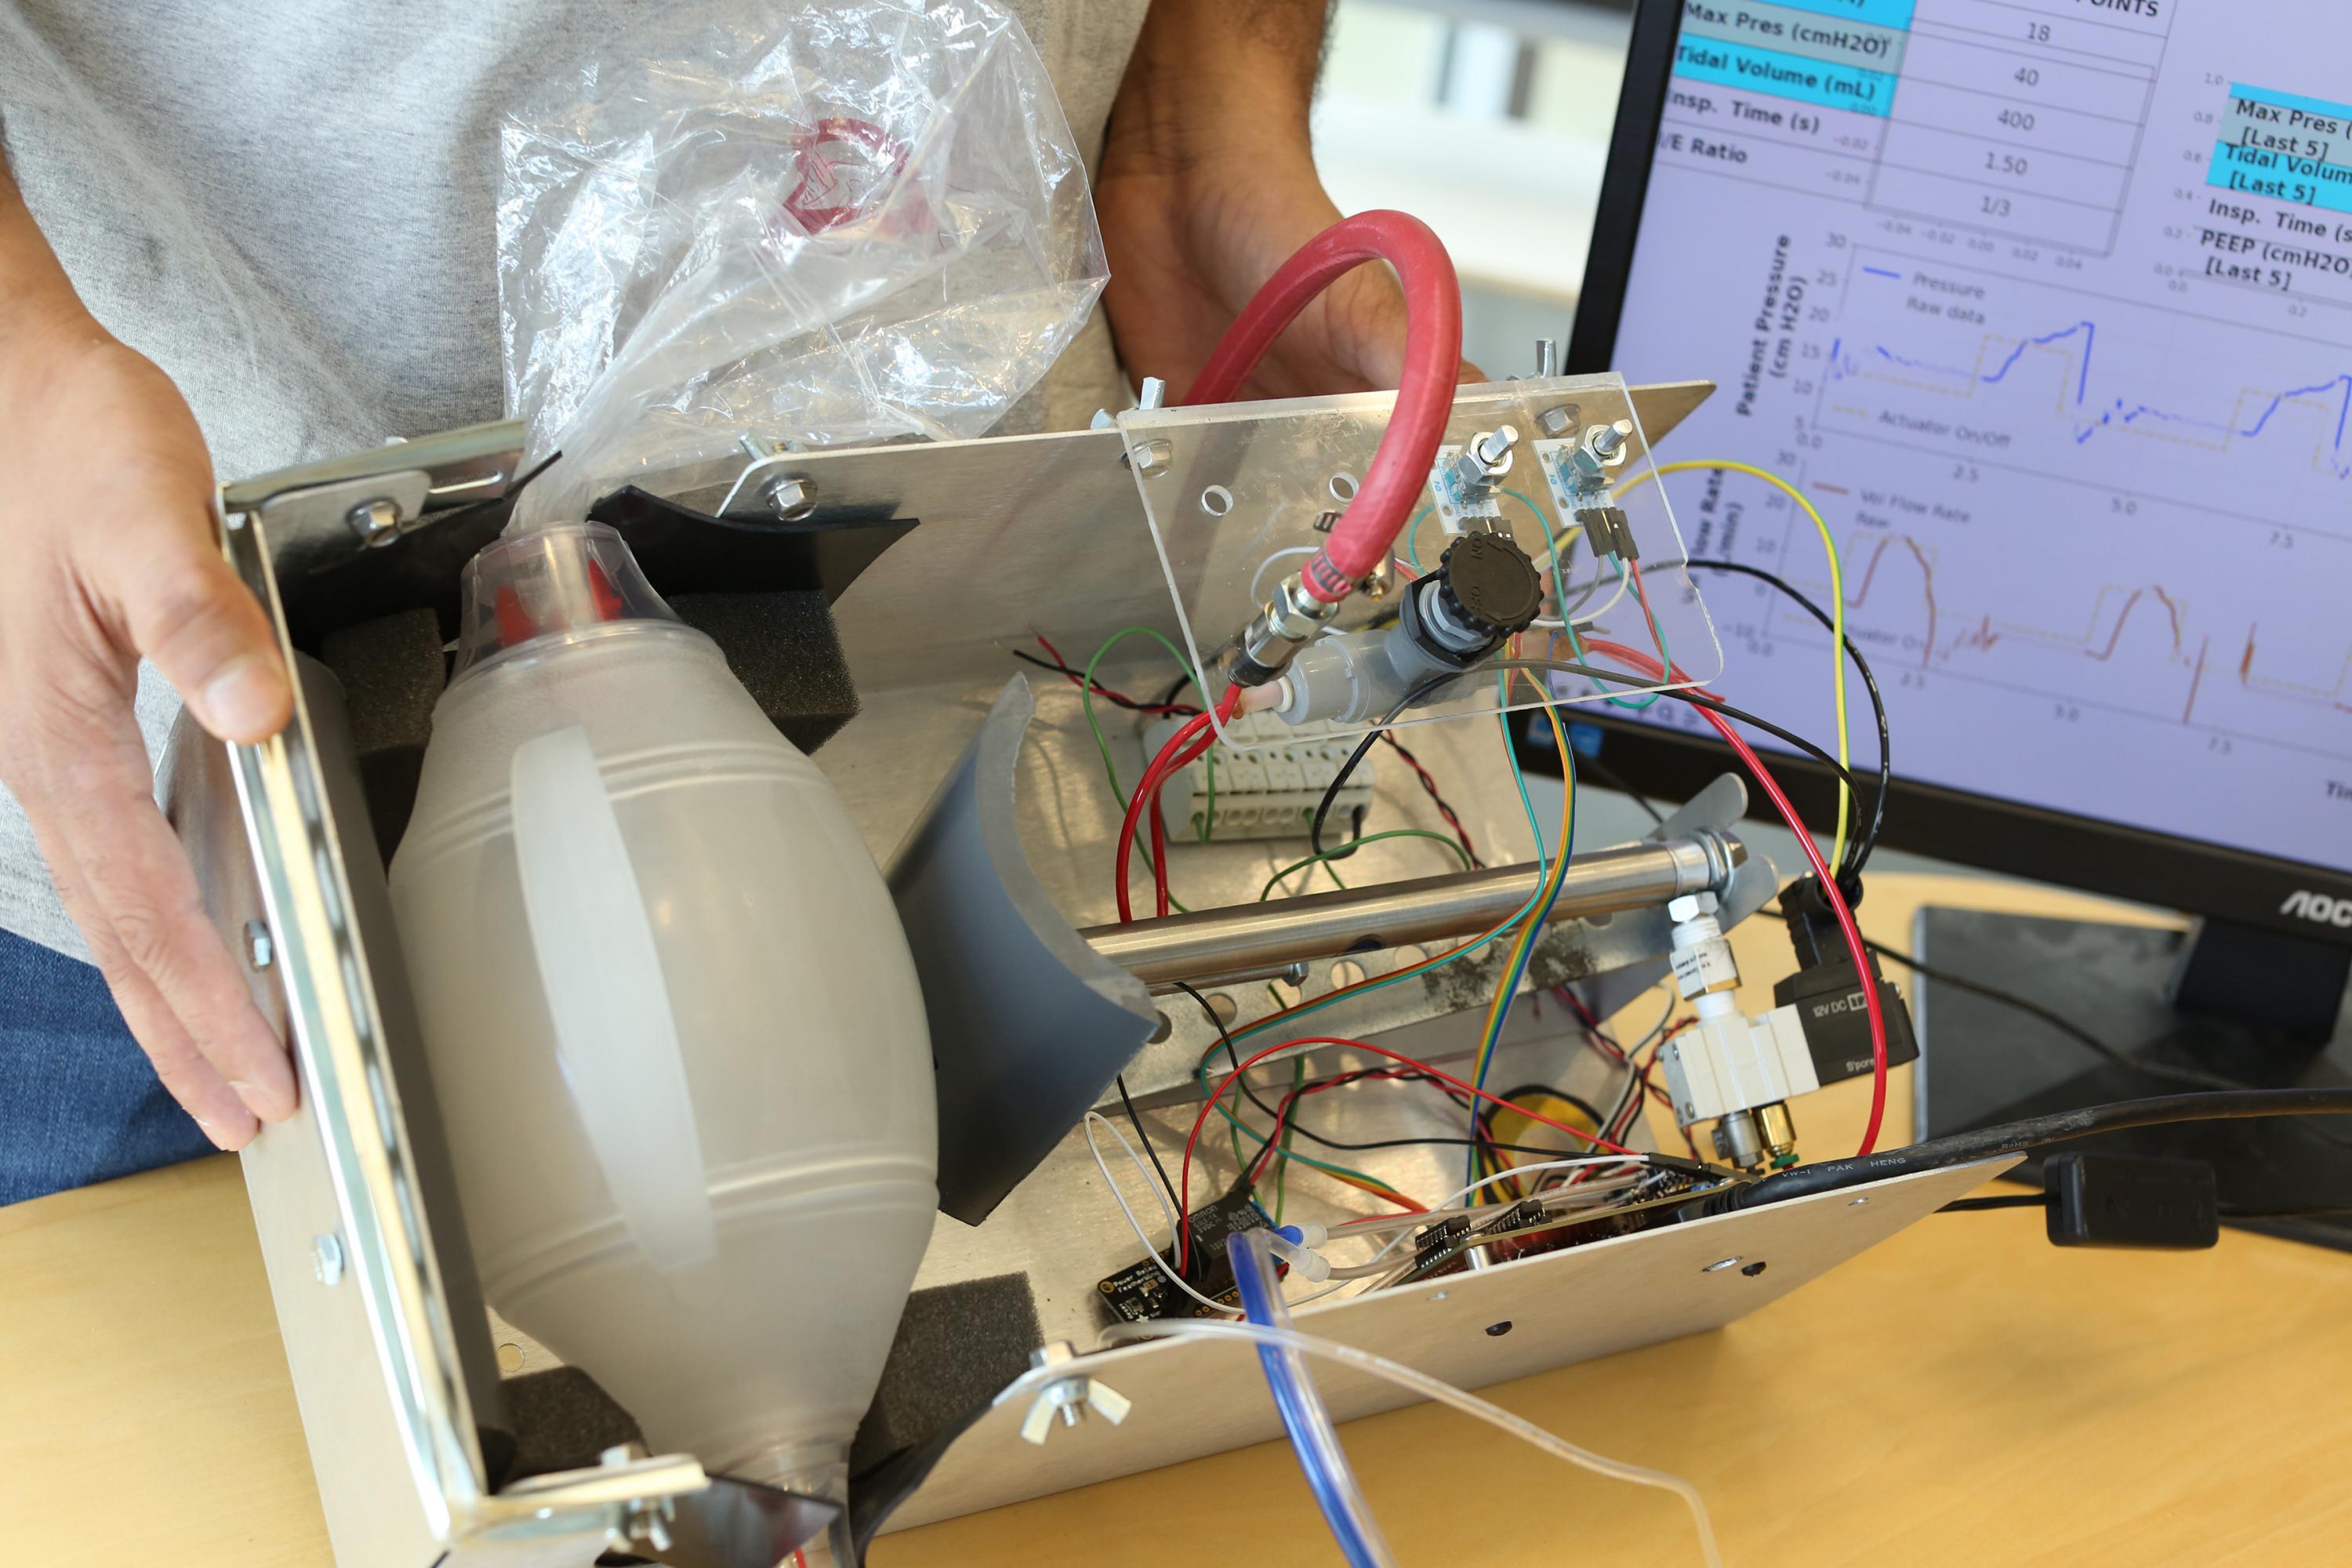 Image shows components of the Open-AirVentGT, a low-cost, portable emergency ventilator that uses electronic sensors and computer control to manage key clinical parameters. From left to right are the BVM resuscitator, the pneumatically-actuated piston, electronics and computer controls. (Credit: Ben Wright, Georgia Tech)